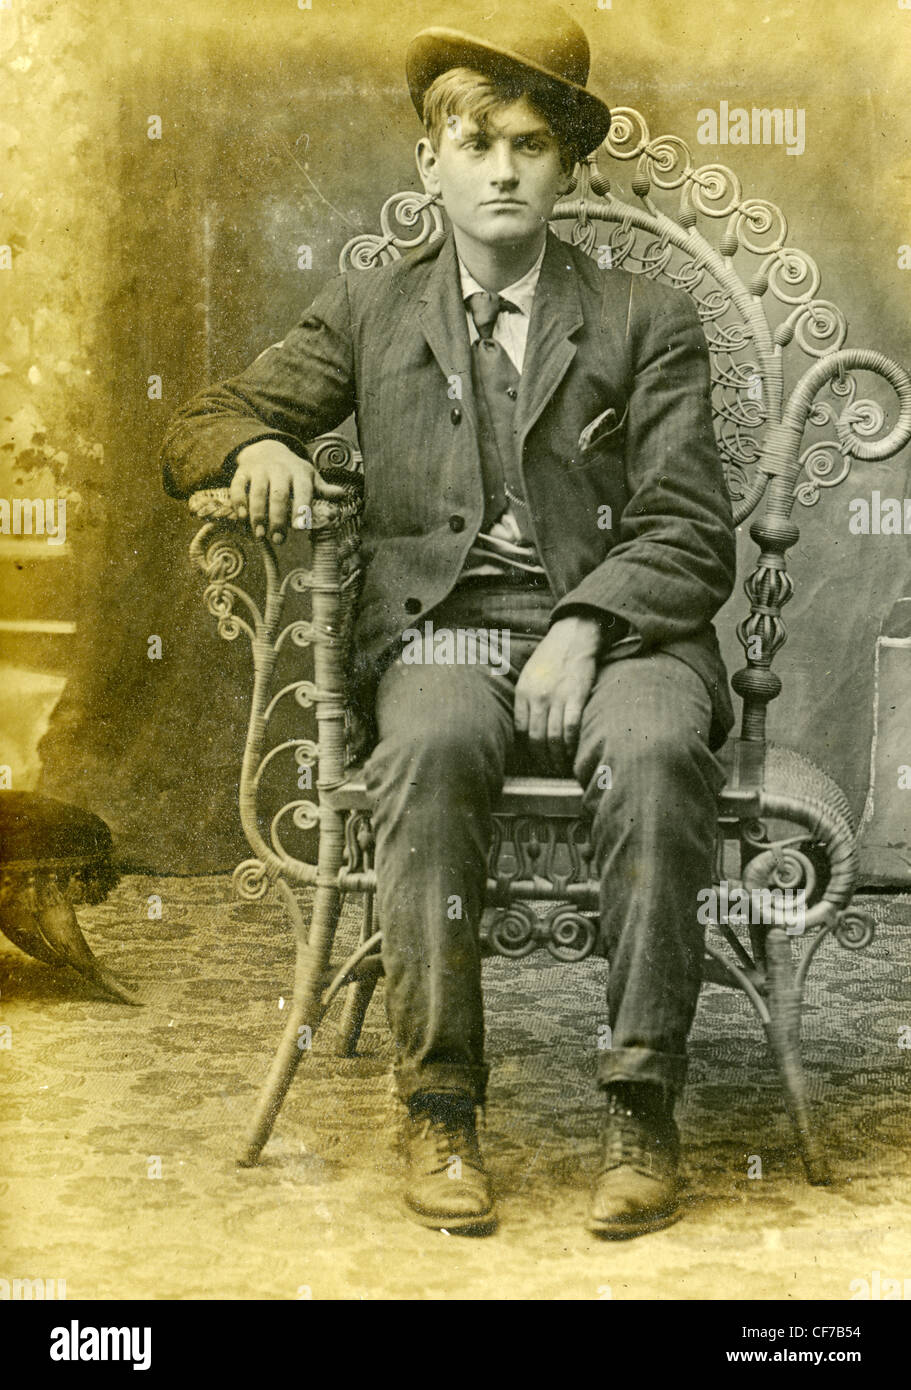 Boy sitting in chair wearing suit and bowler hat during late 1800s or ...